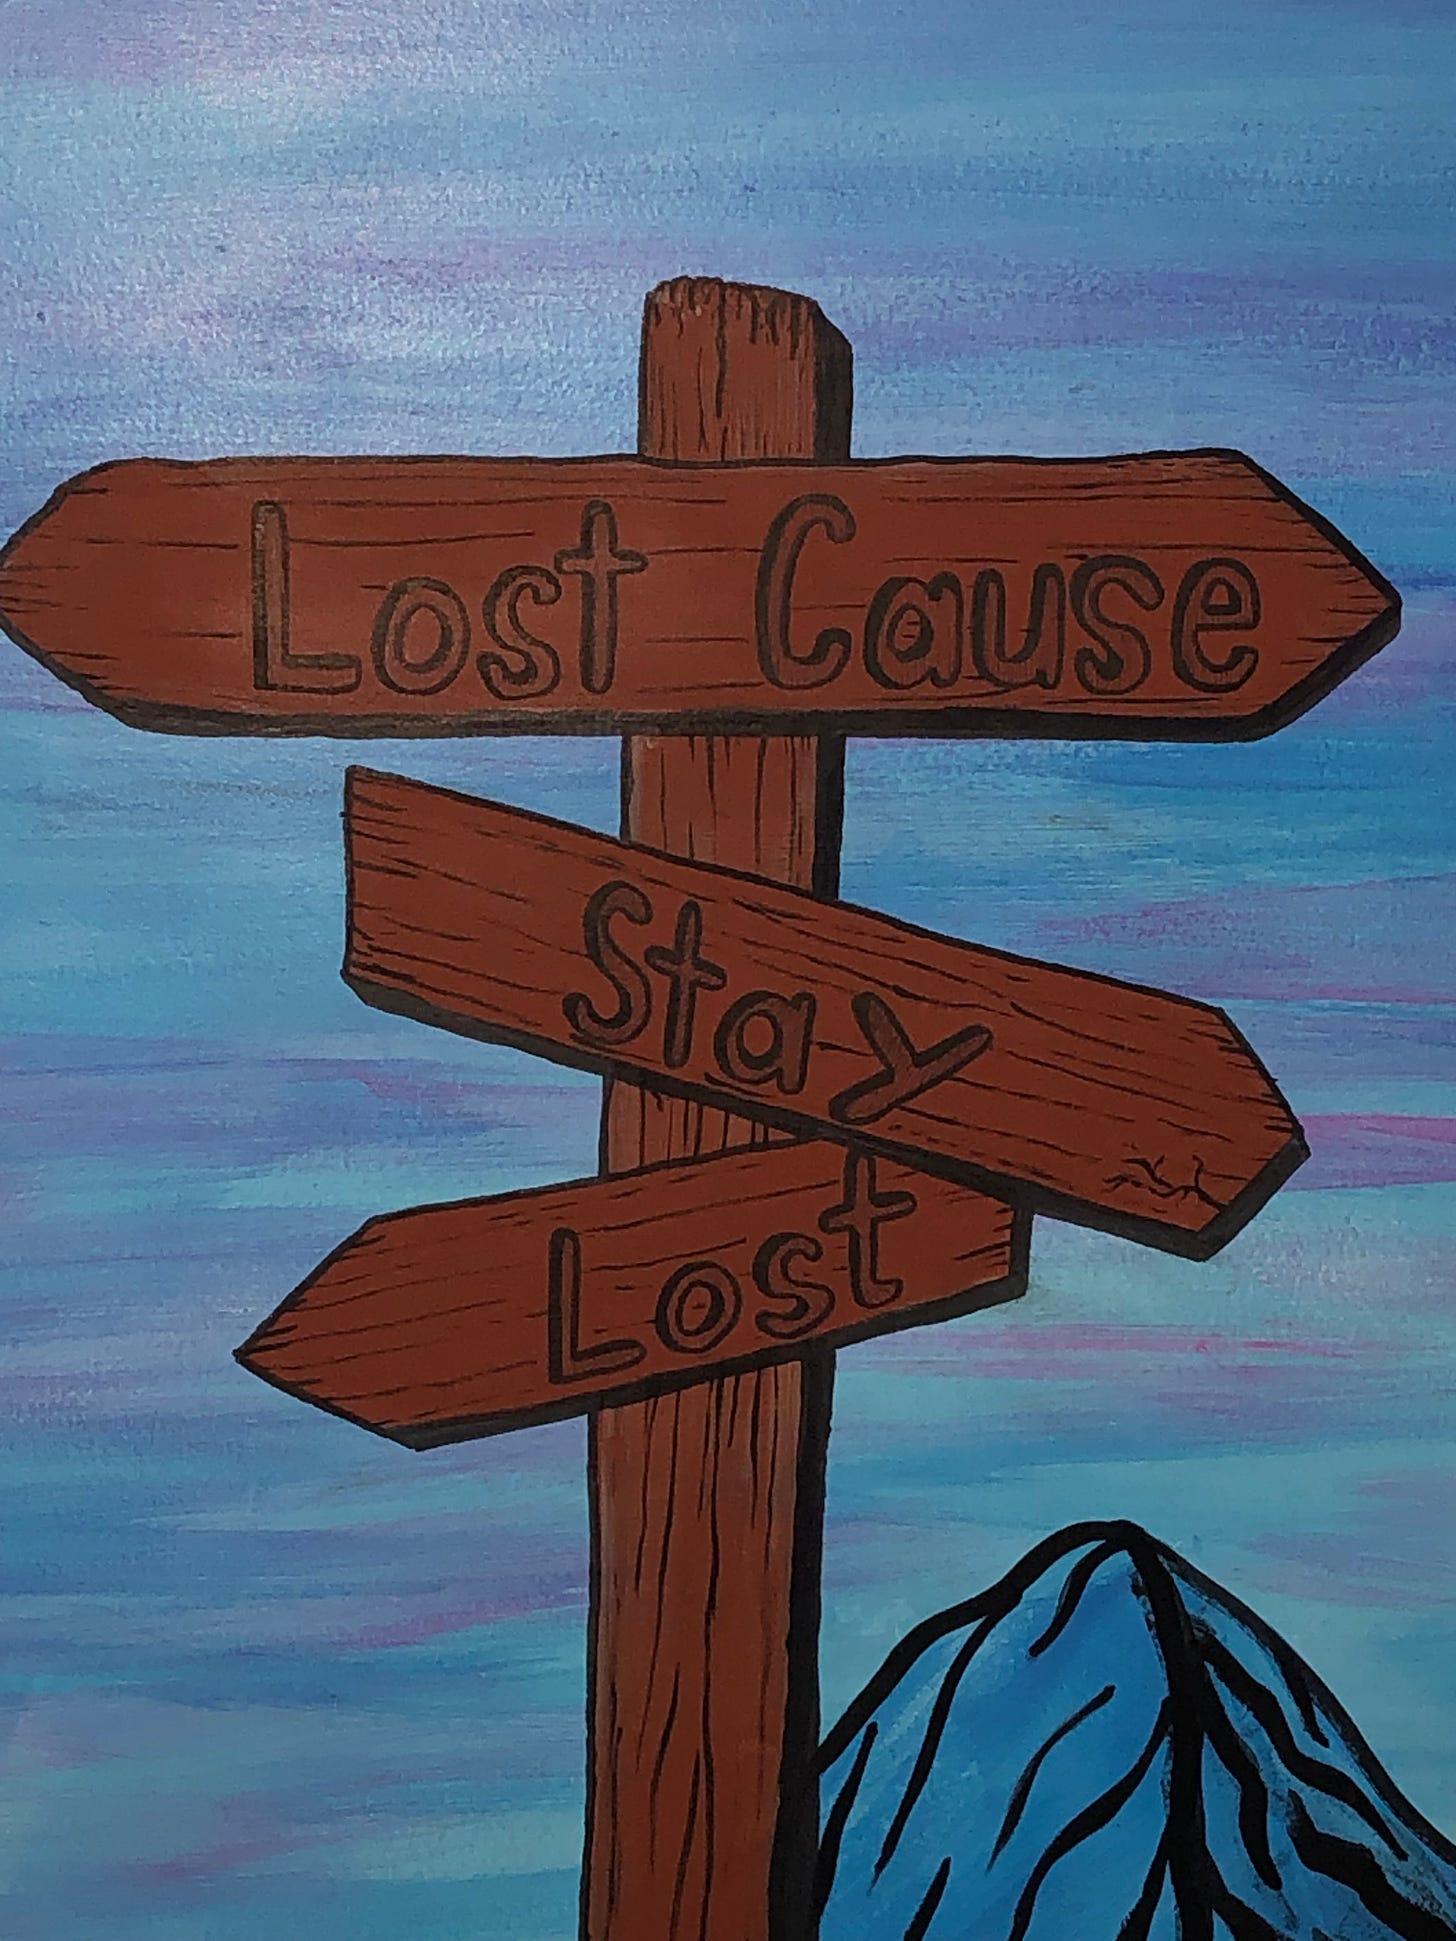 A trail sign with arrows that say “Lost Cause” and “Stay Lost.”